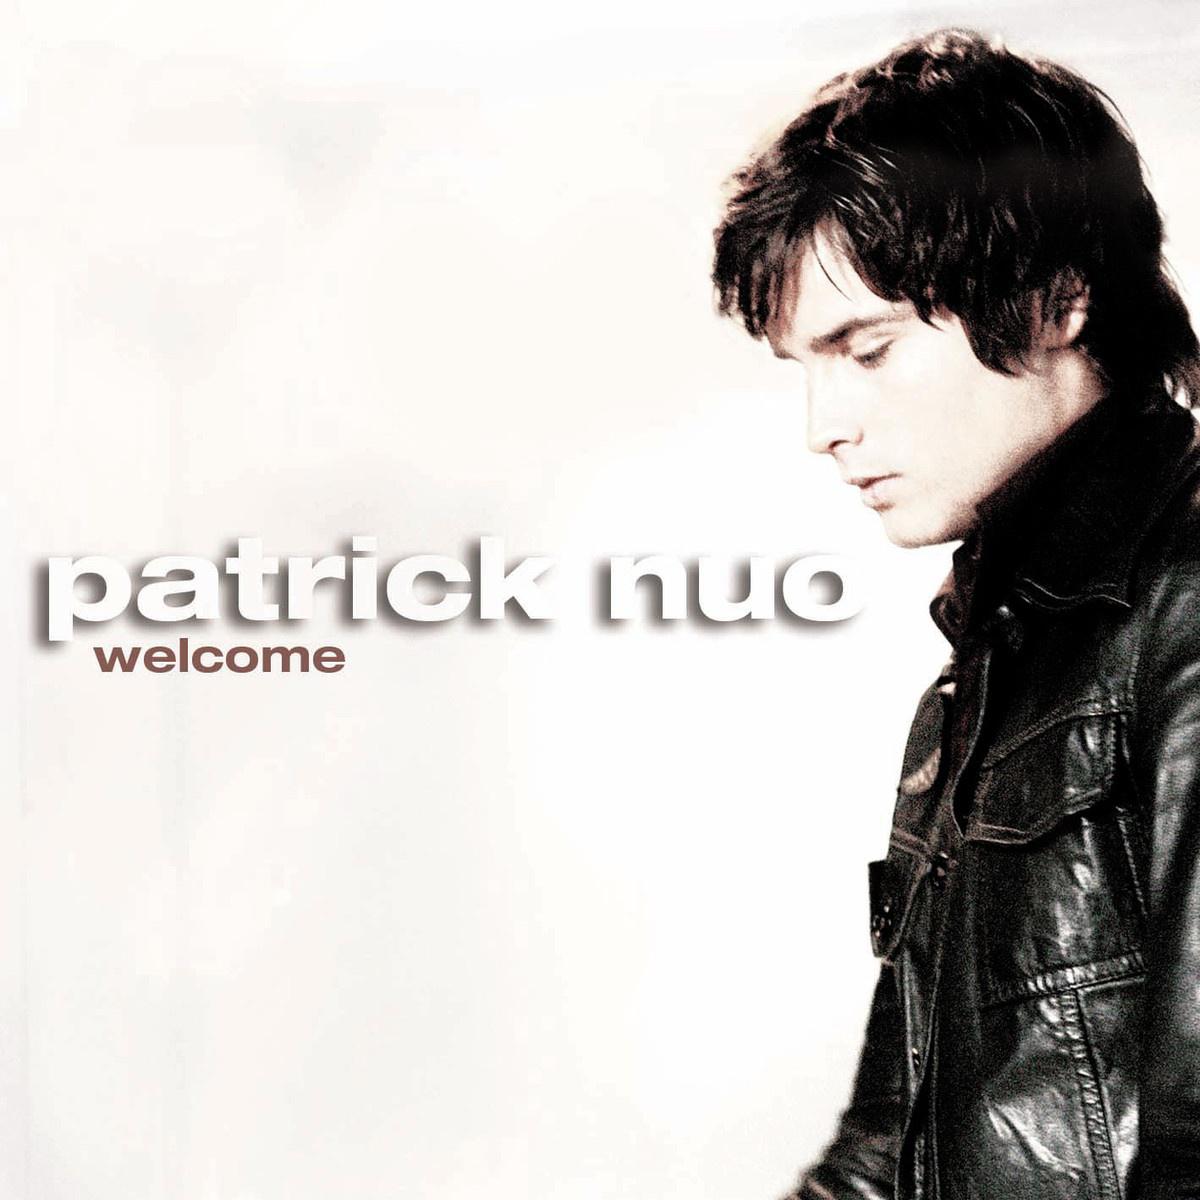 Patrick Nuo - Unknown Girl